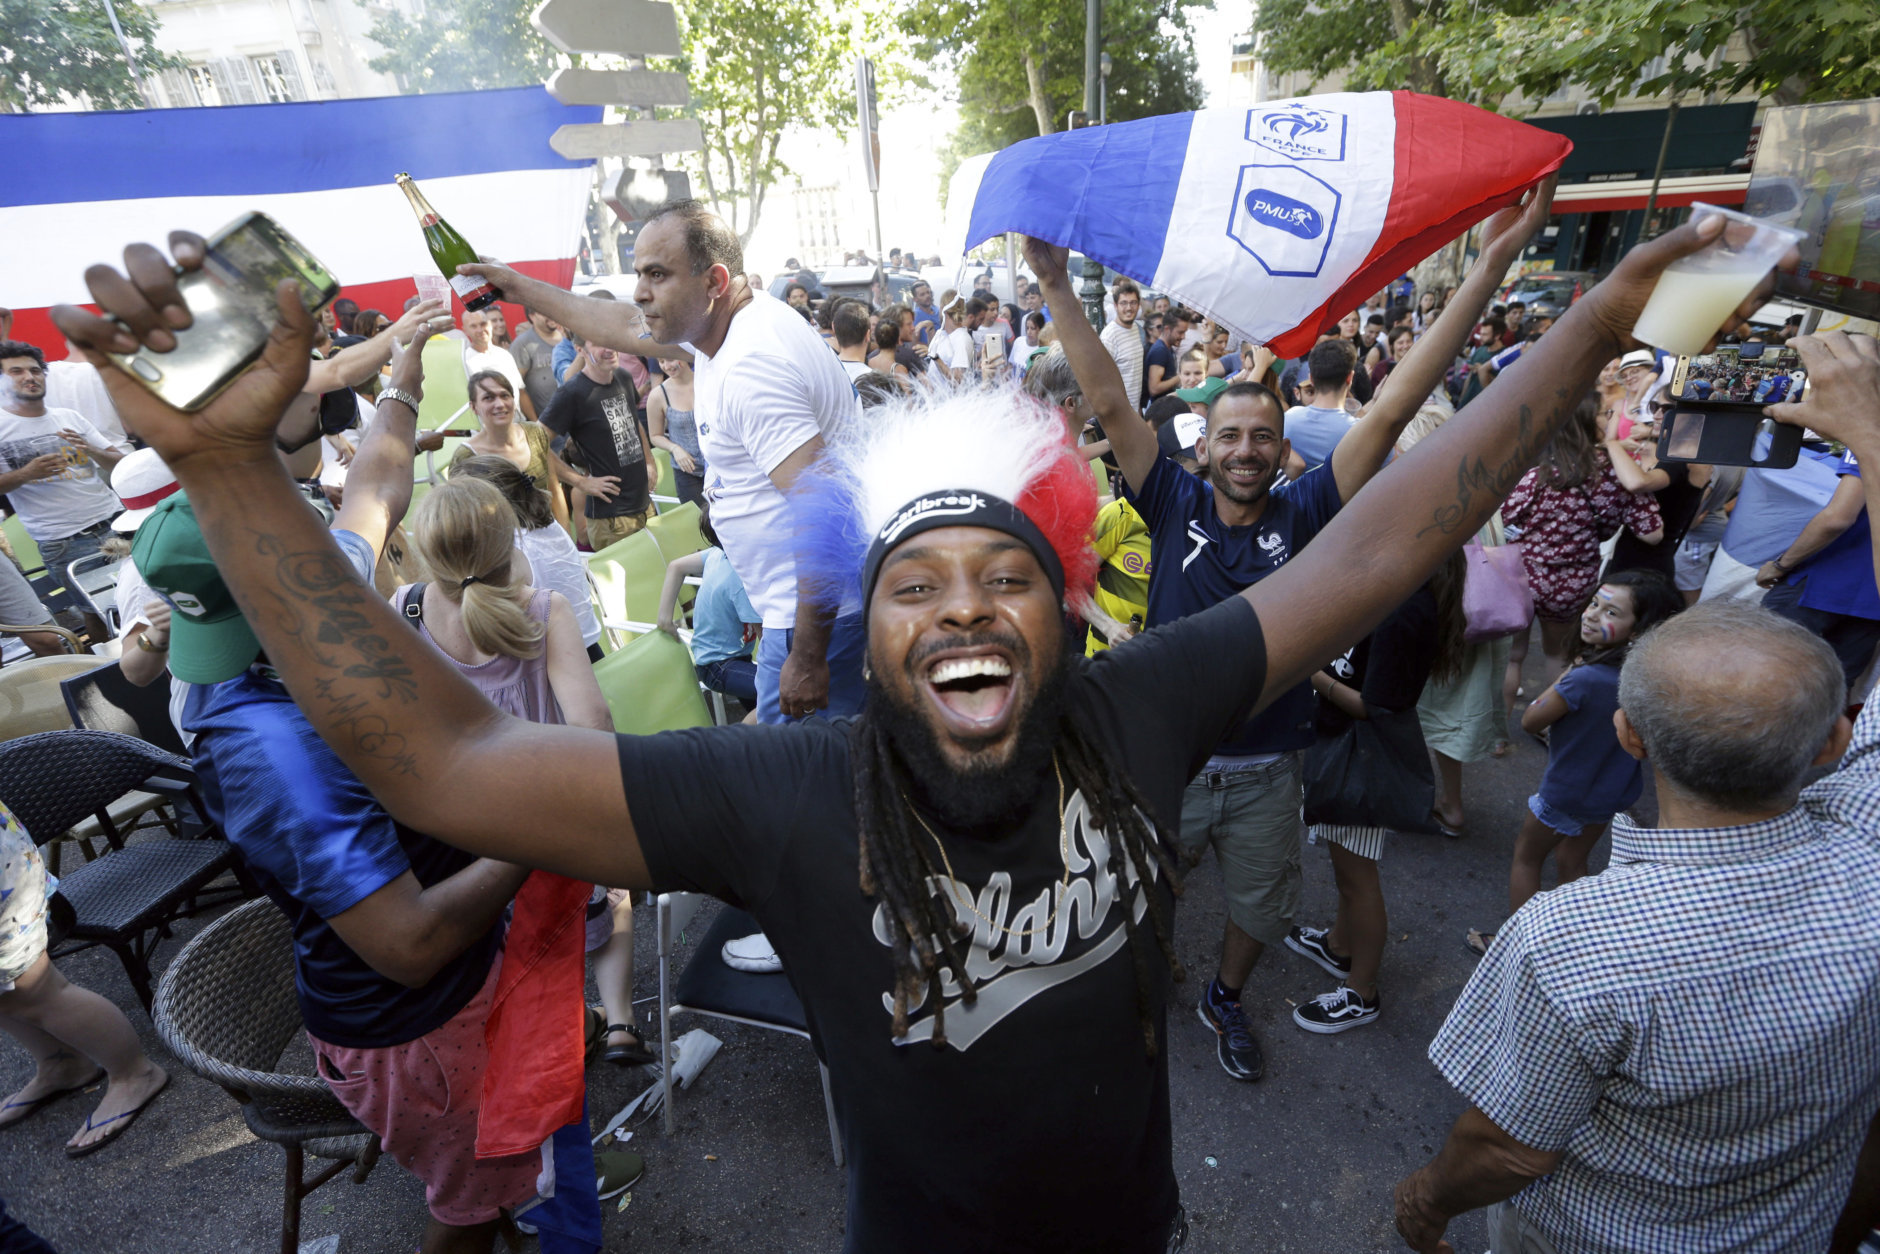 Supporters of France celebrate the victory ot their team against Uruguay during their quarterfinal match at the 2018 soccer World Cup played in Russia, as they watch a live broadcast of the match in a bar, in Marseille, southern France, Friday, July 6, 2018. (AP Photo/Claude Paris)